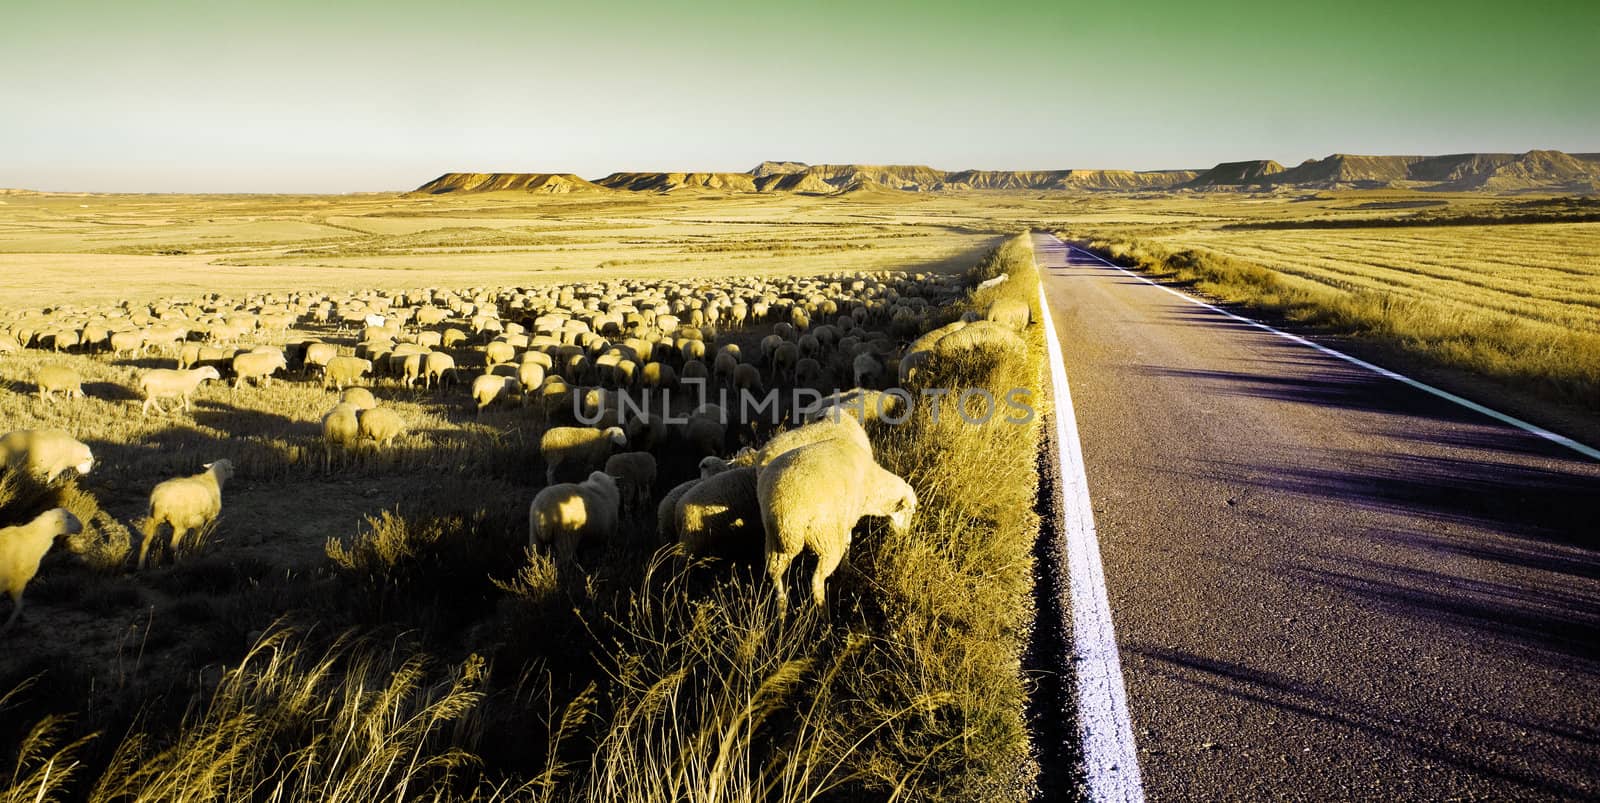 Rural landscape with flock of sheep in the desert